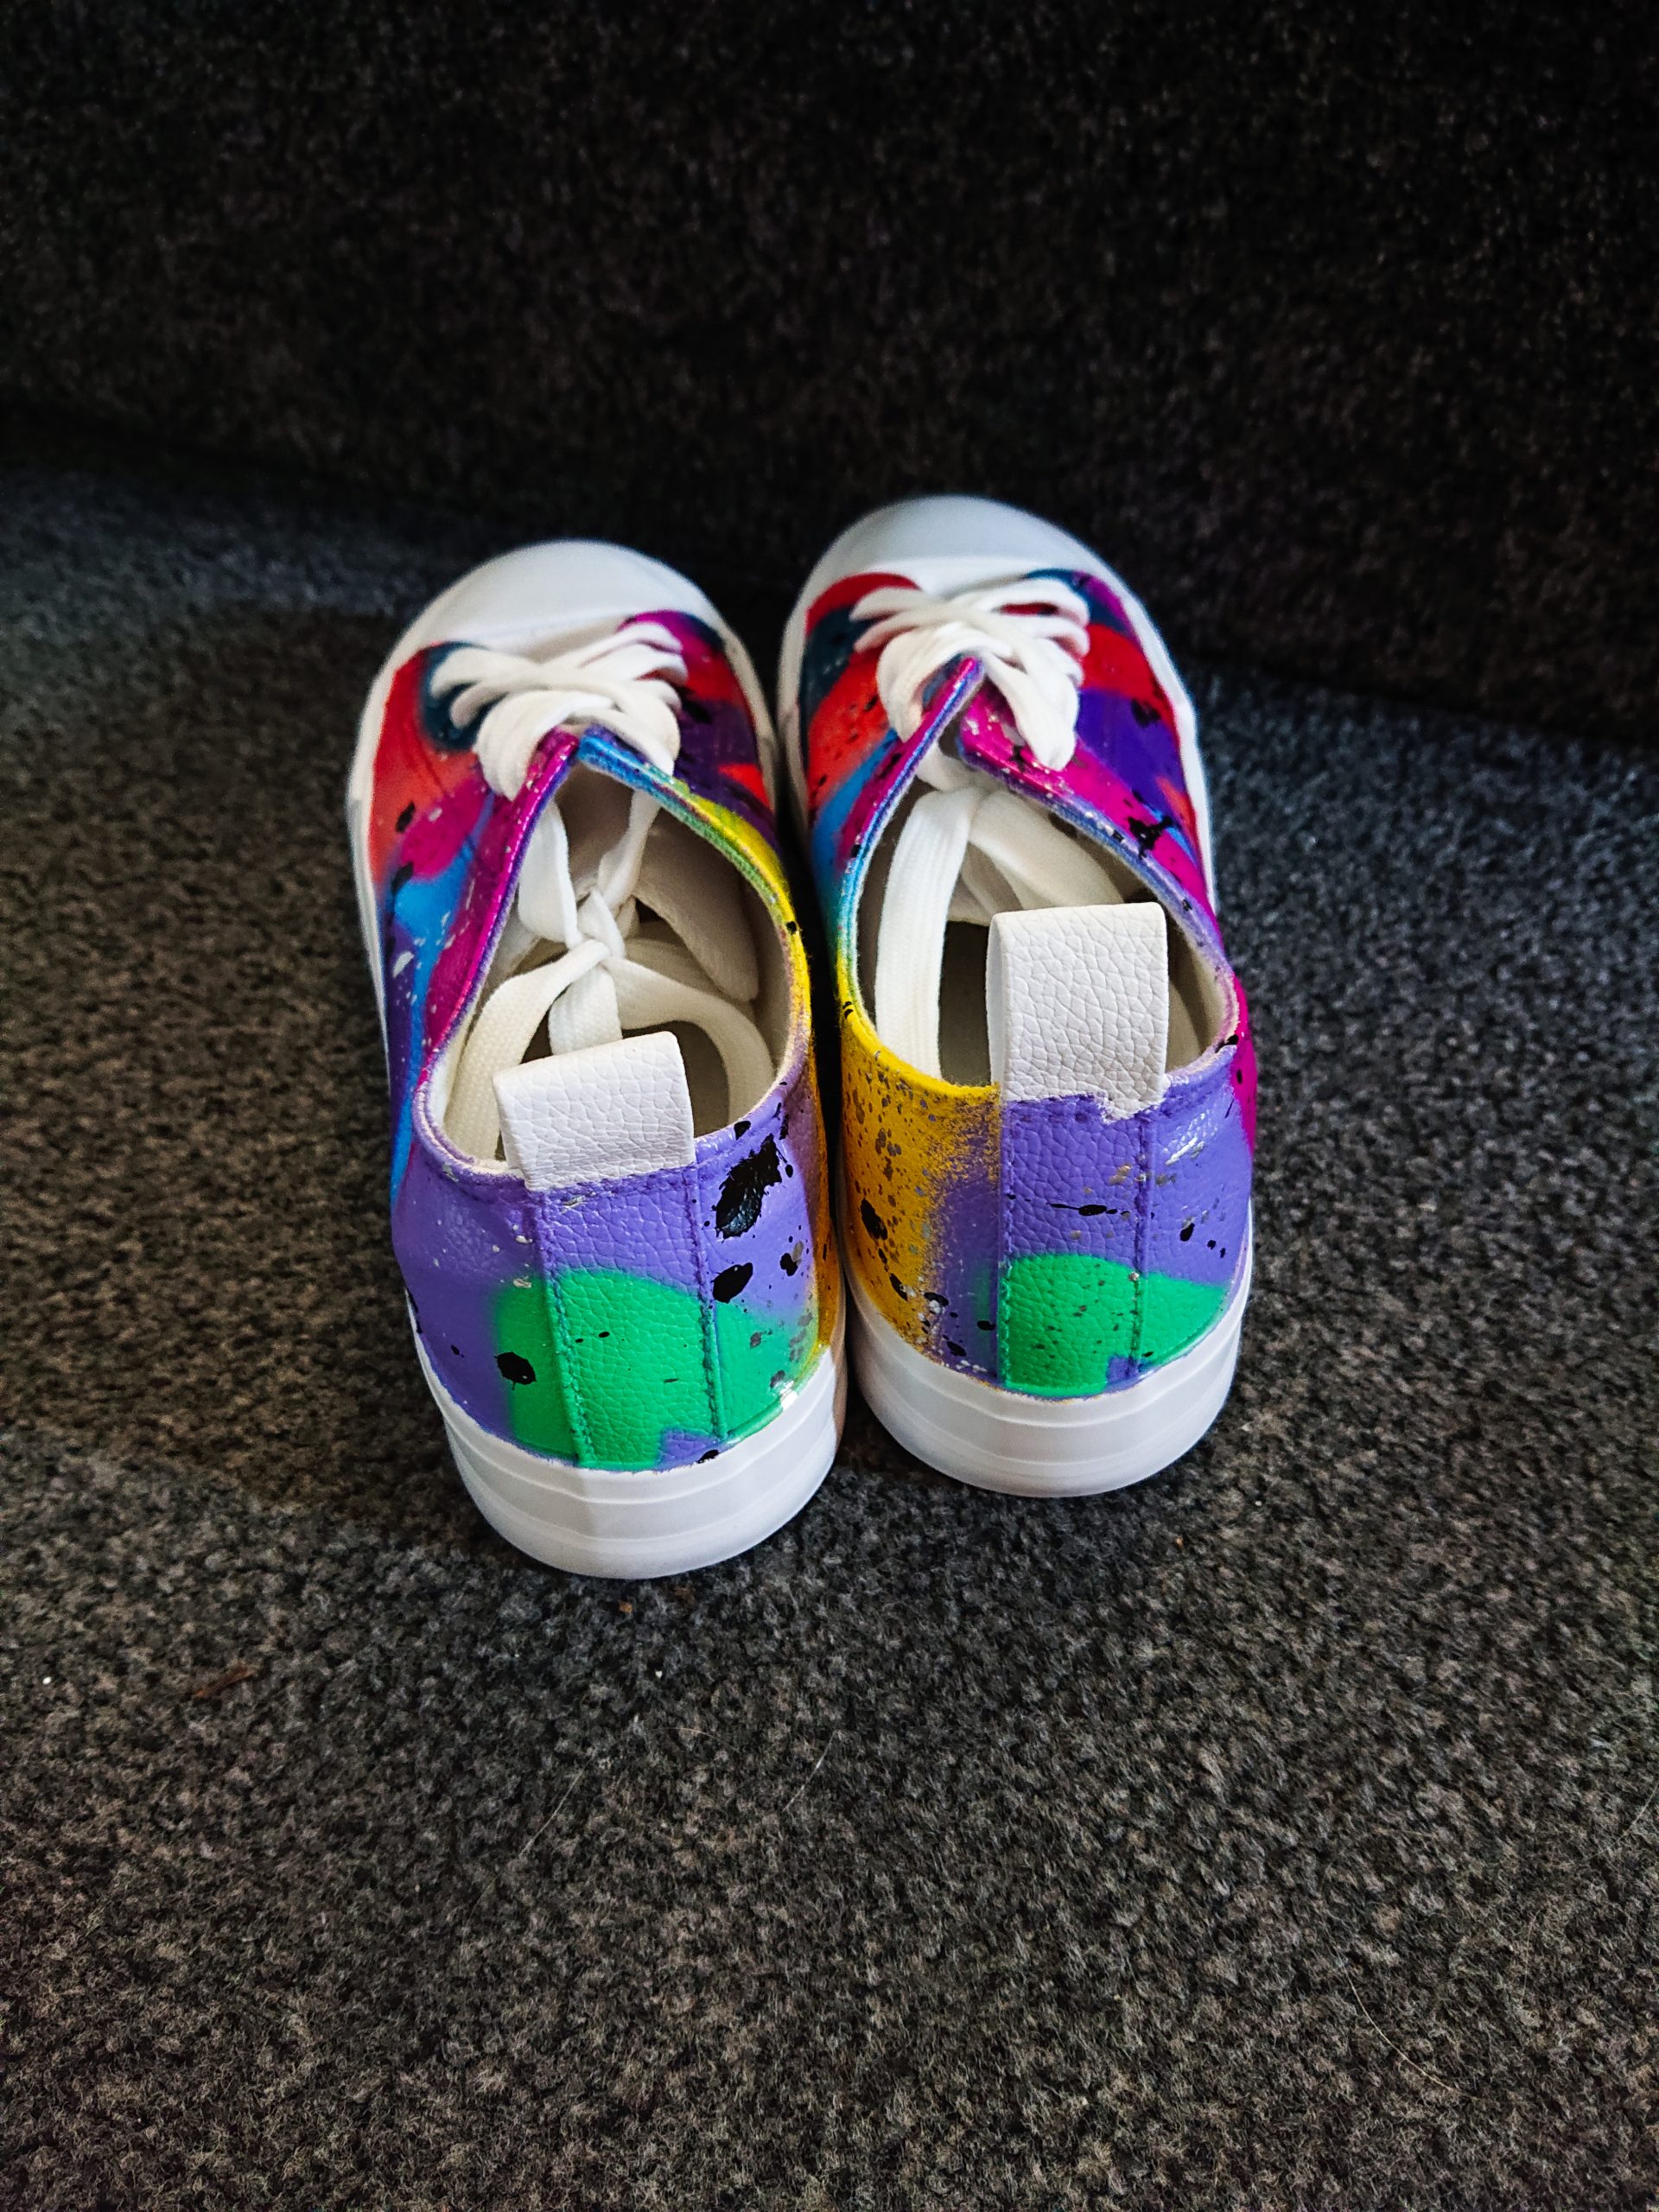 GRAFFITI STYLE TRAINERS | Killer Pete | Painted Trainers and Vans